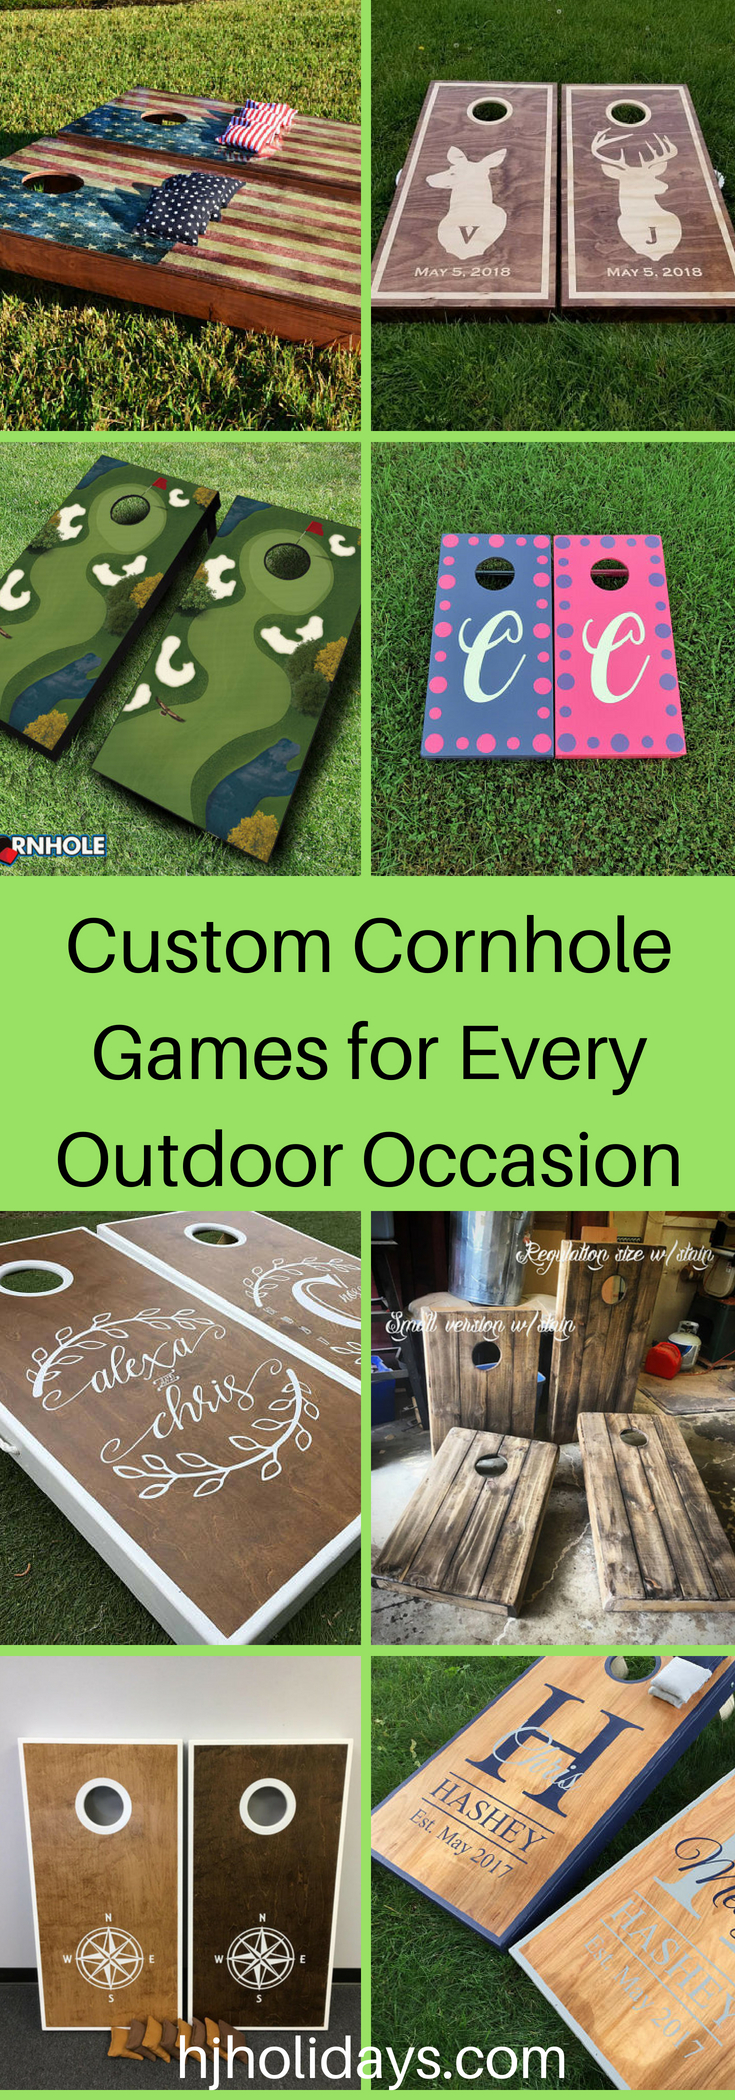 Custom Cornhole Games for Every Outdoor Occasion